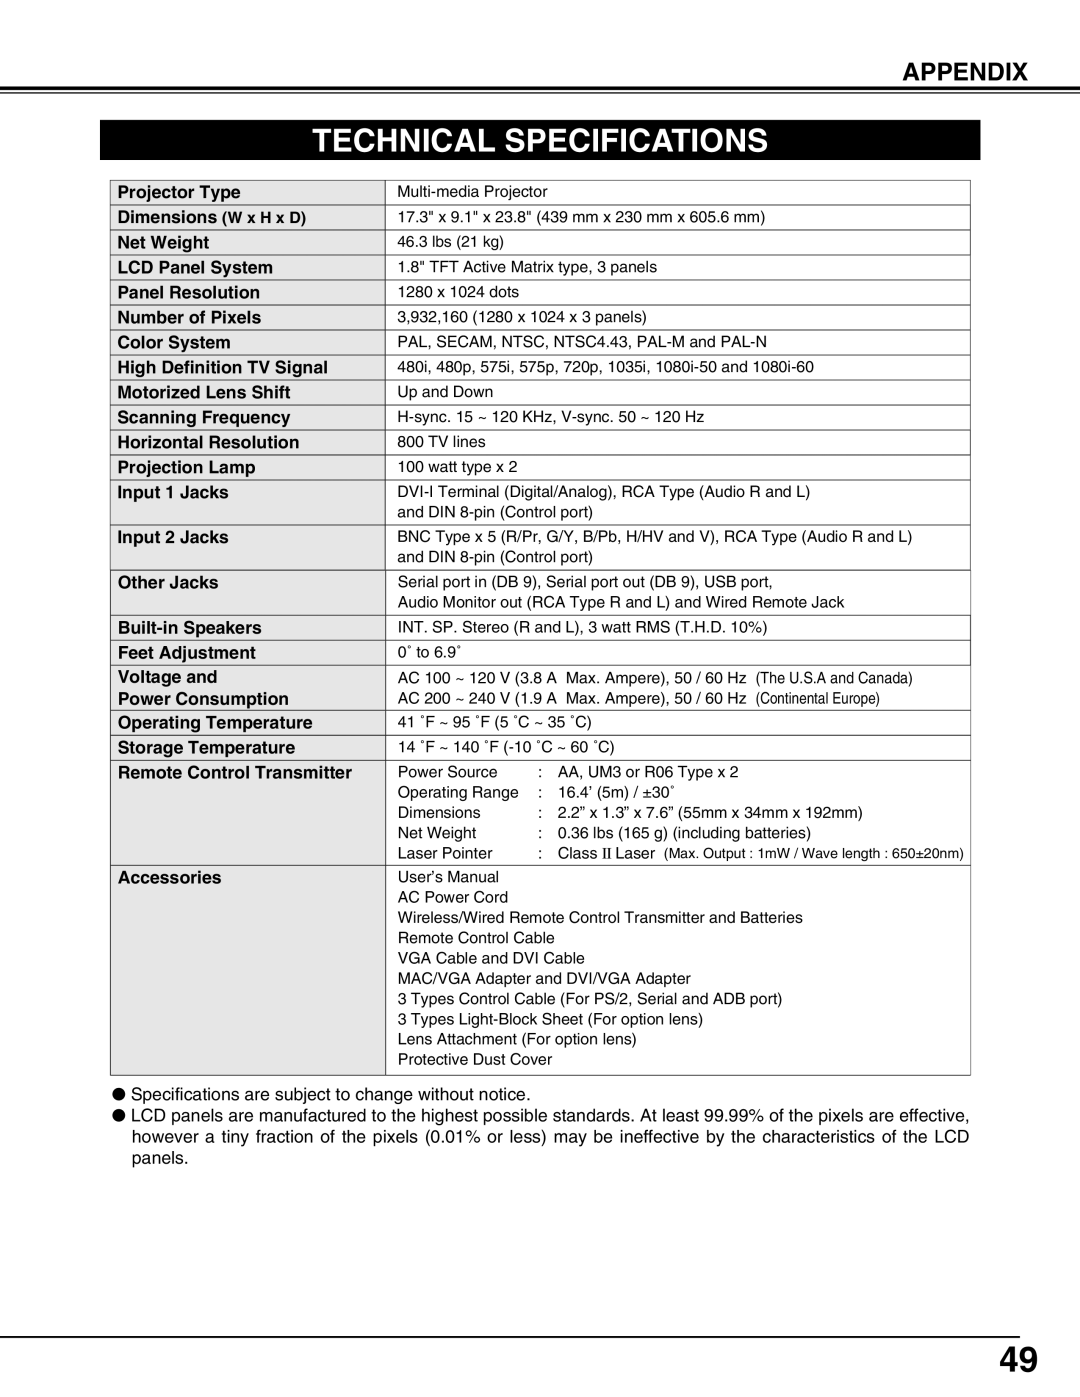 Christie Digital Systems 38-MX2001-01 user manual Technical Specifications, Appendix 